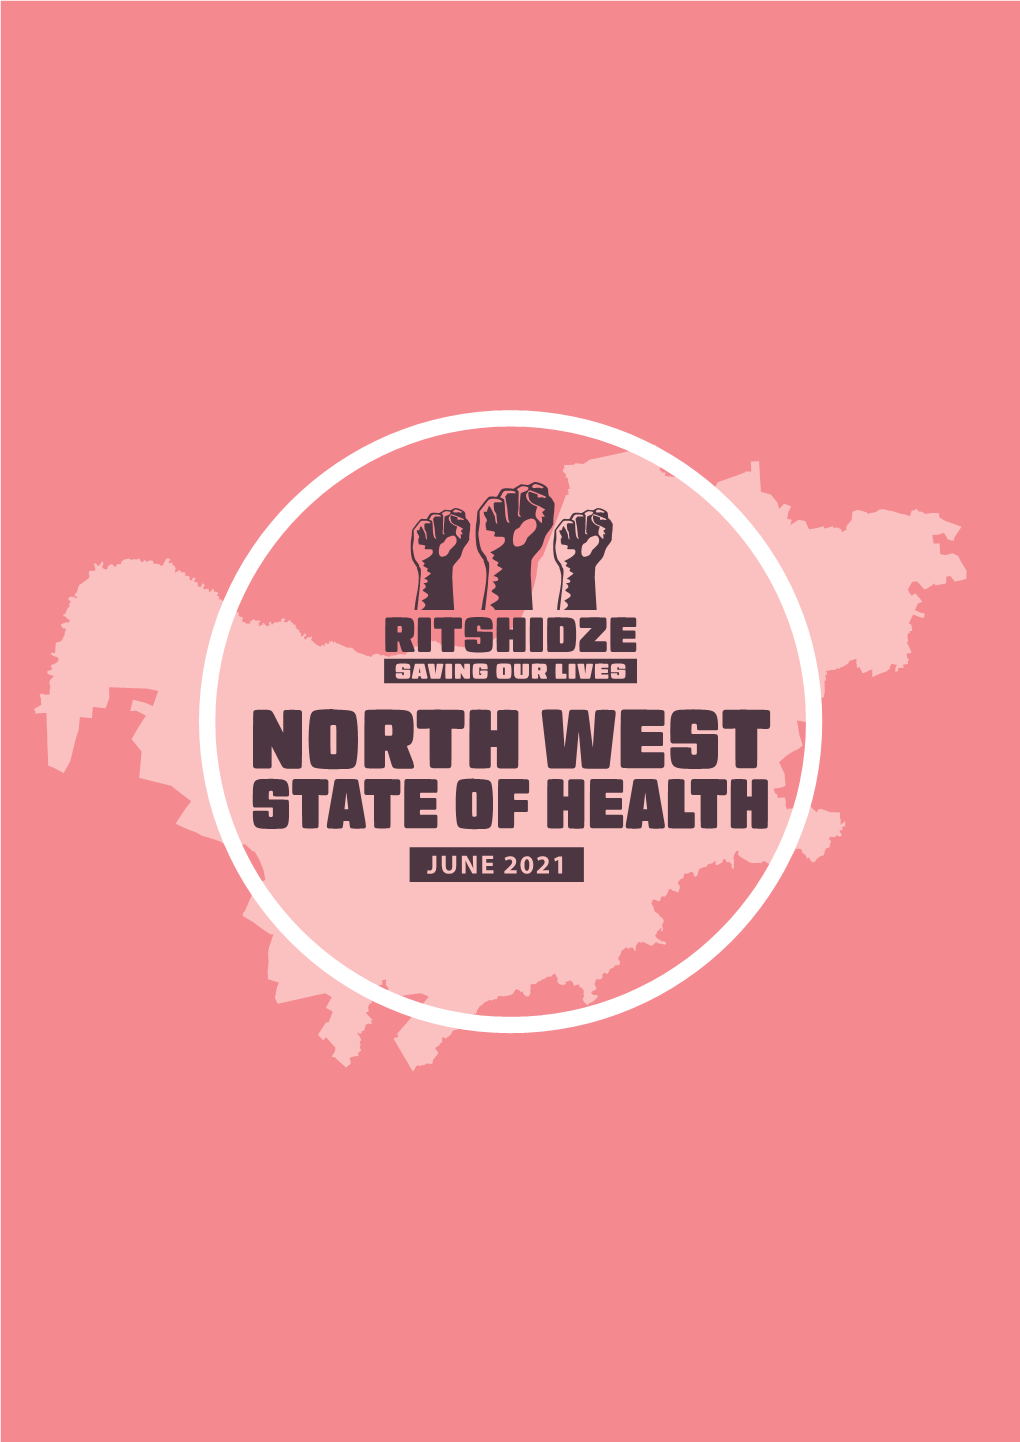 North West “State of Health” Report